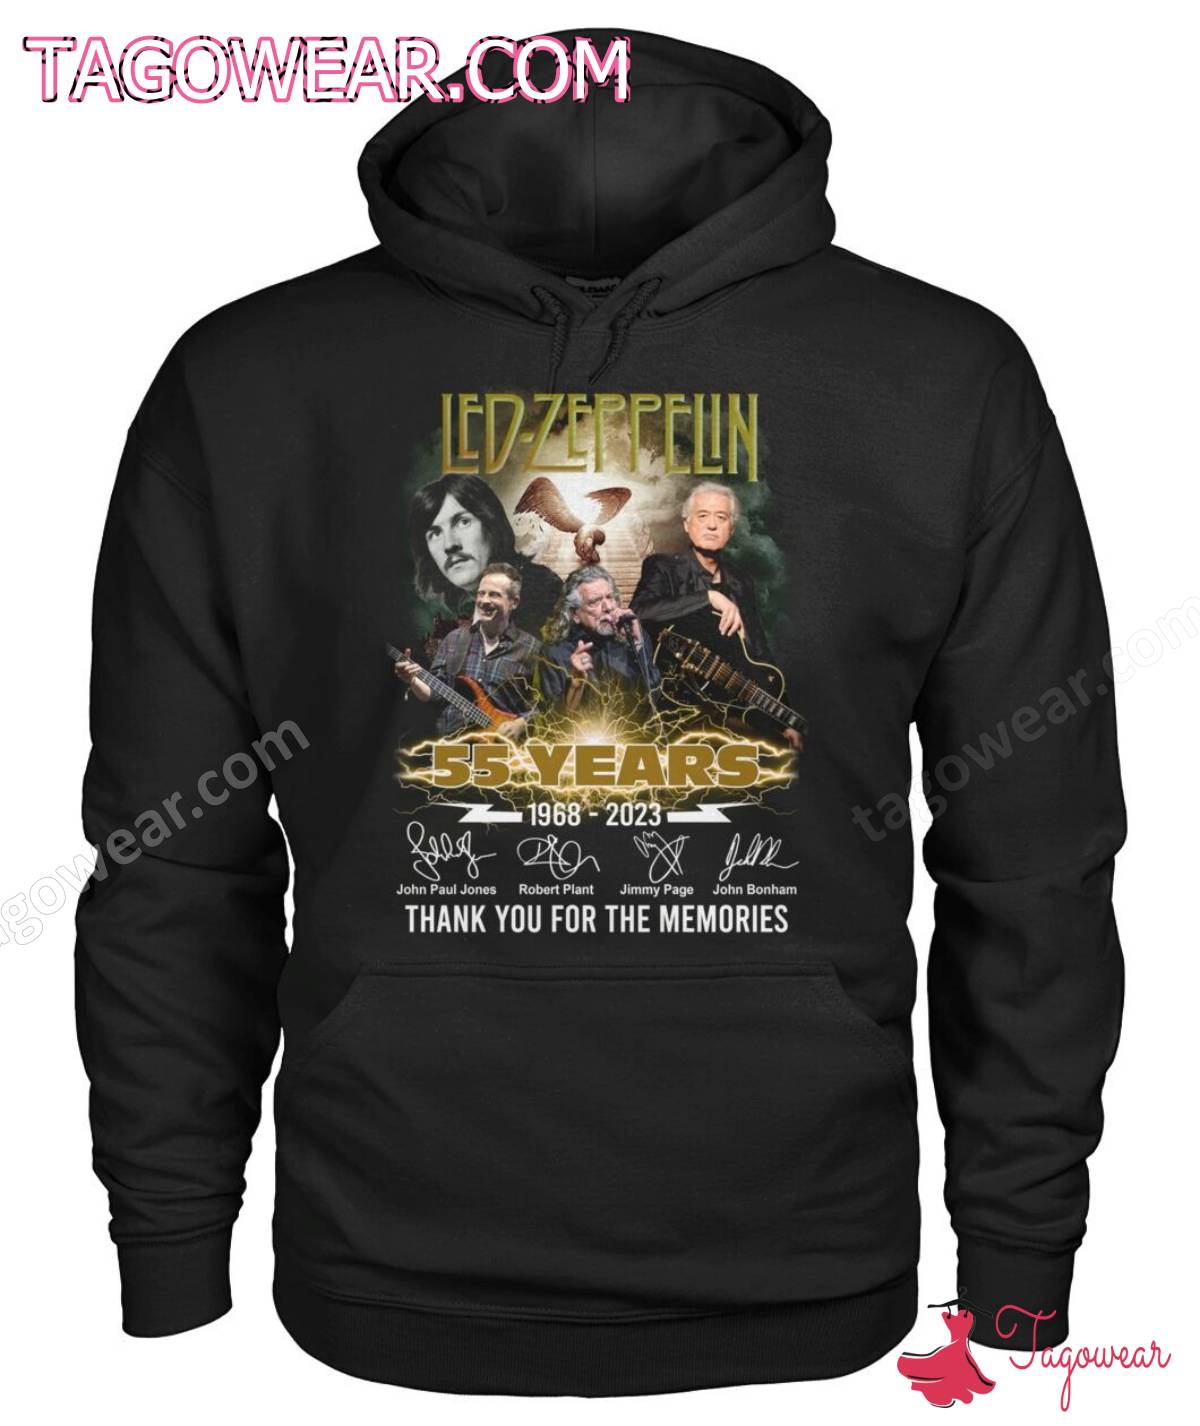 Led-zeppelin 55 Years 1968-2023 Signatures Thank You For The Memories Shirt, Tank Top a